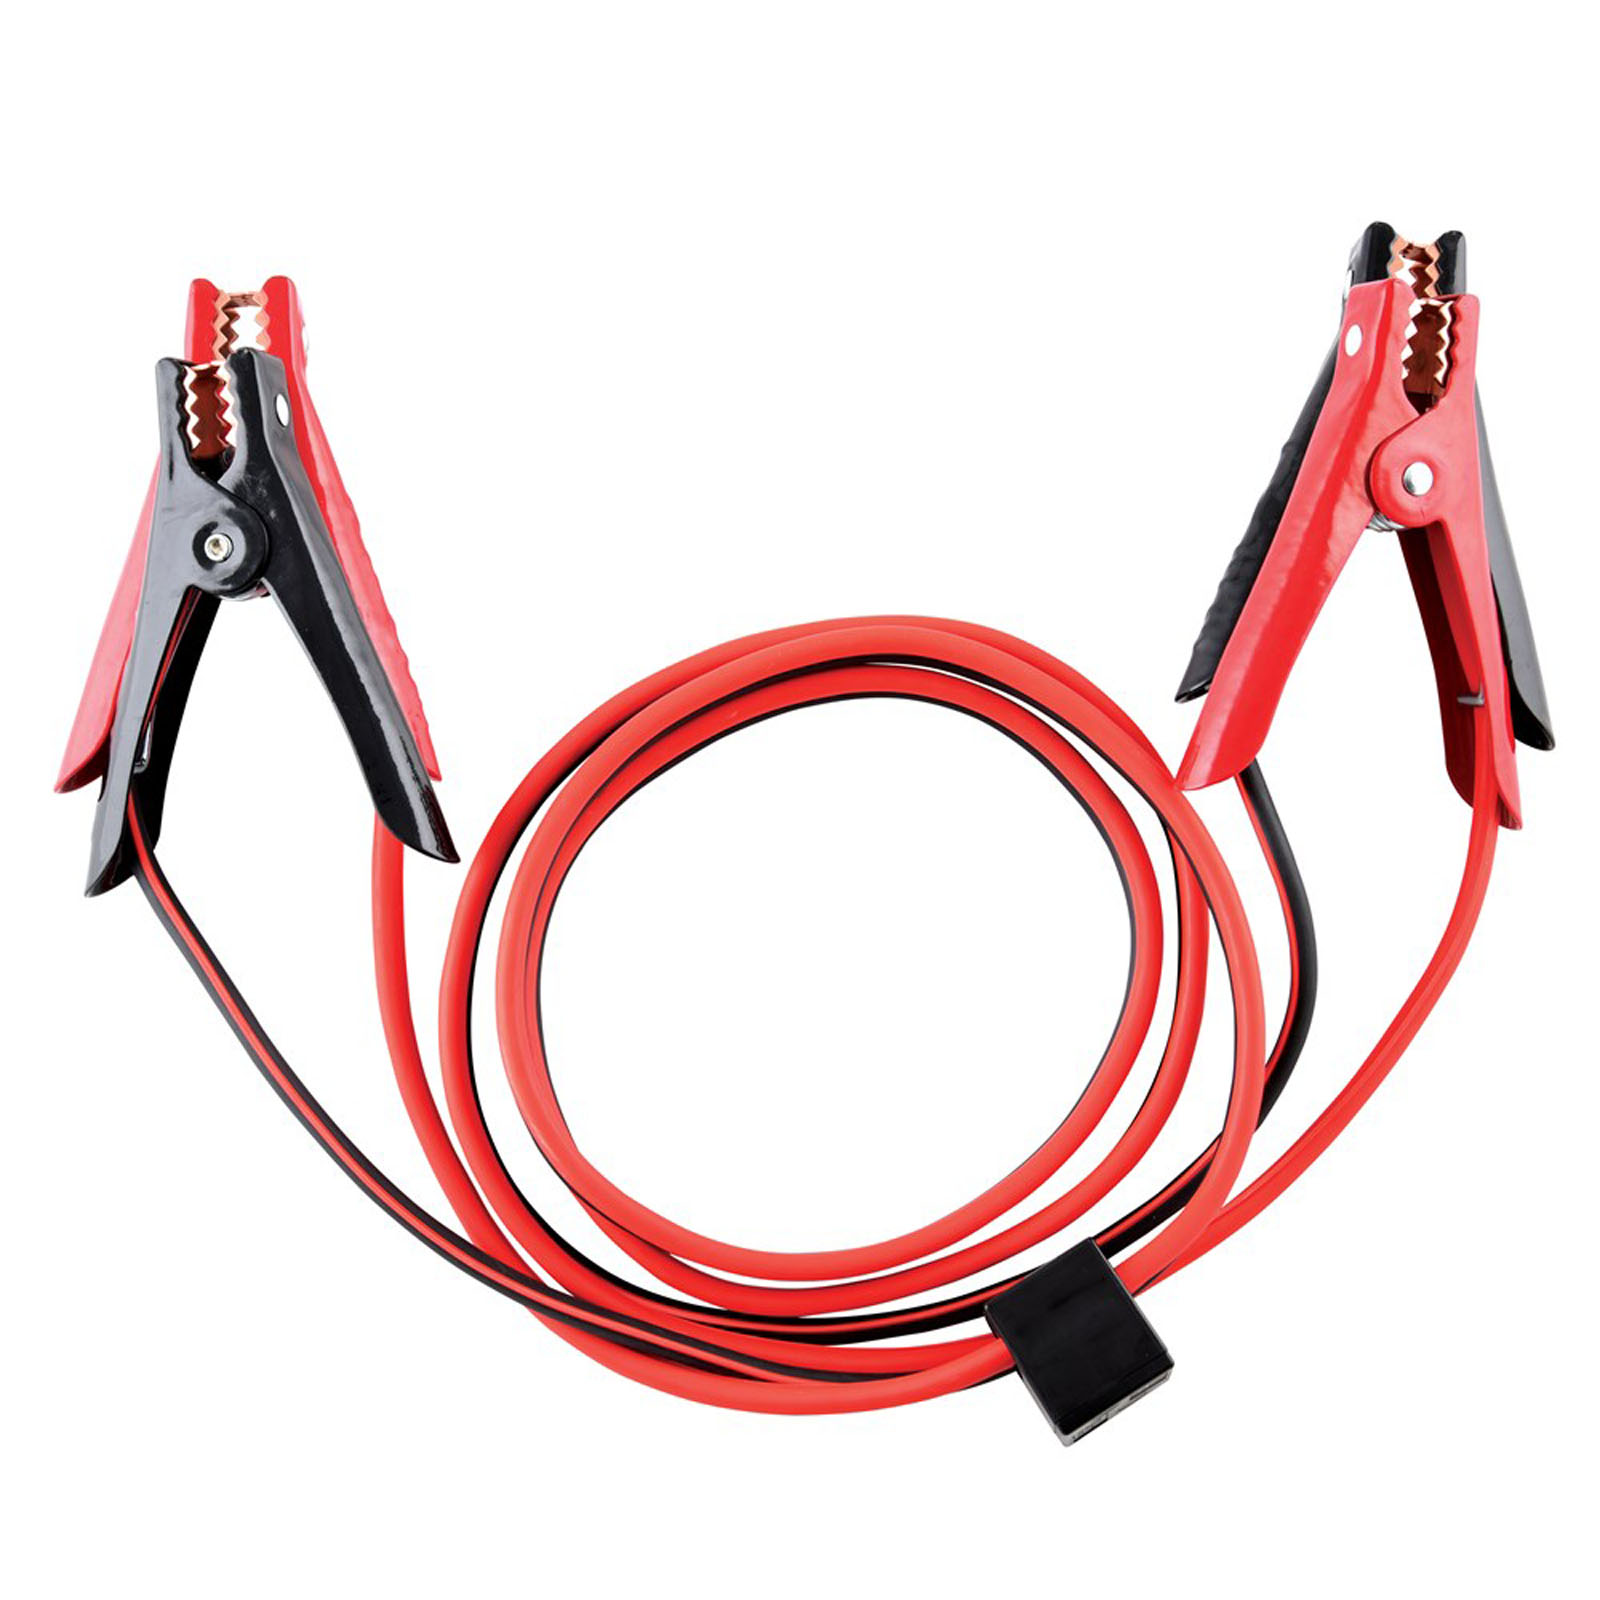 Kincrome Premium 400 Amp Booster Cables - KP1453 - Auto One